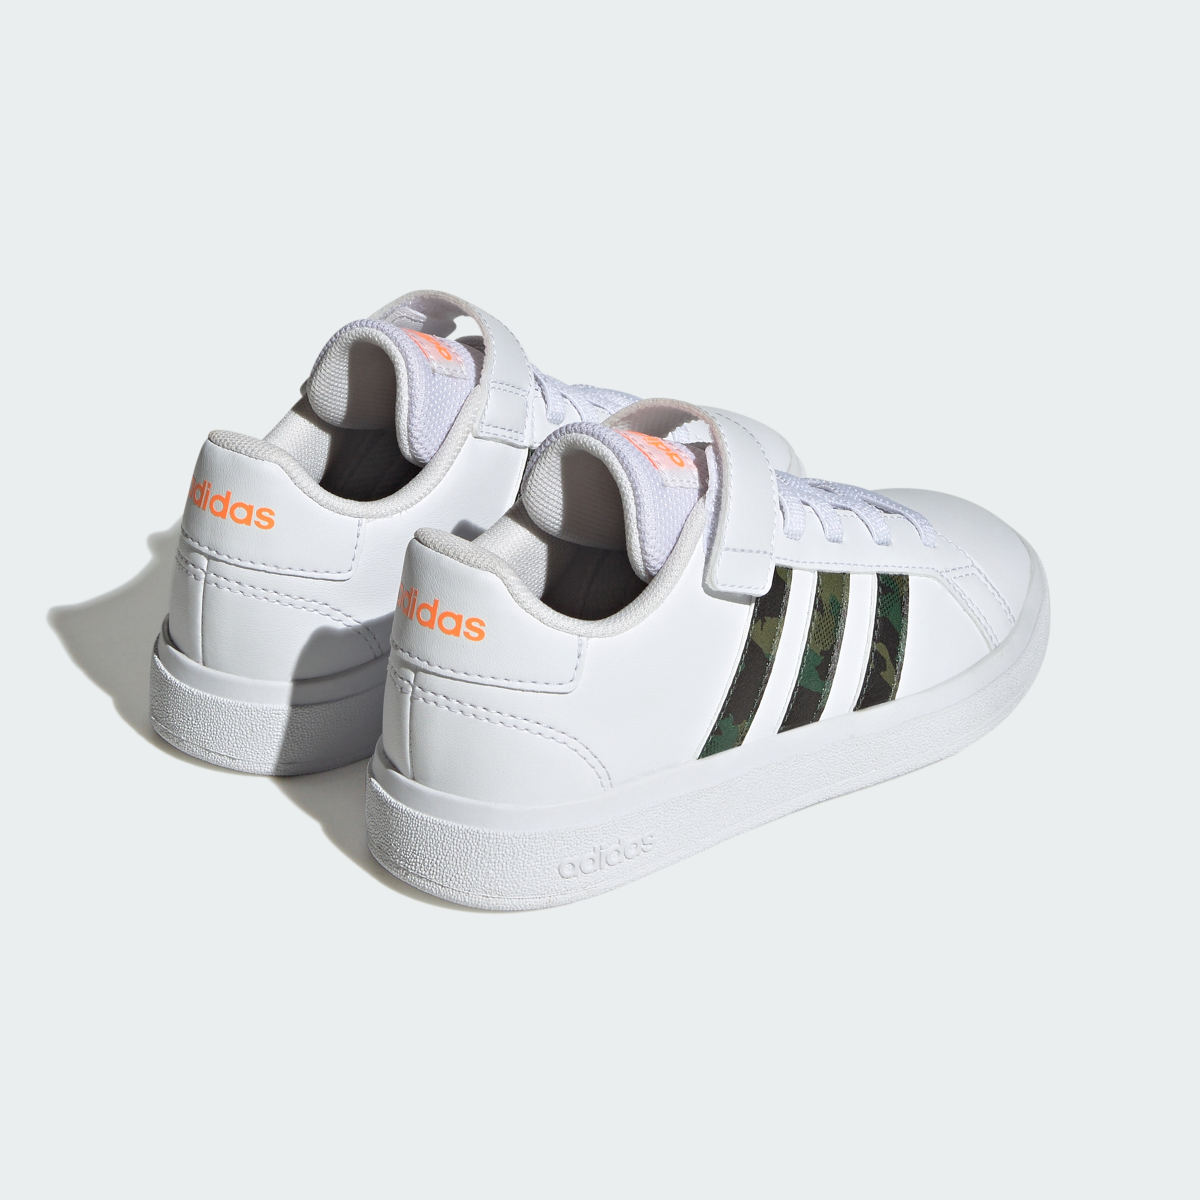 Adidas Grand Court Lifestyle Court Elastic Lace and Top Strap Schuh. 6